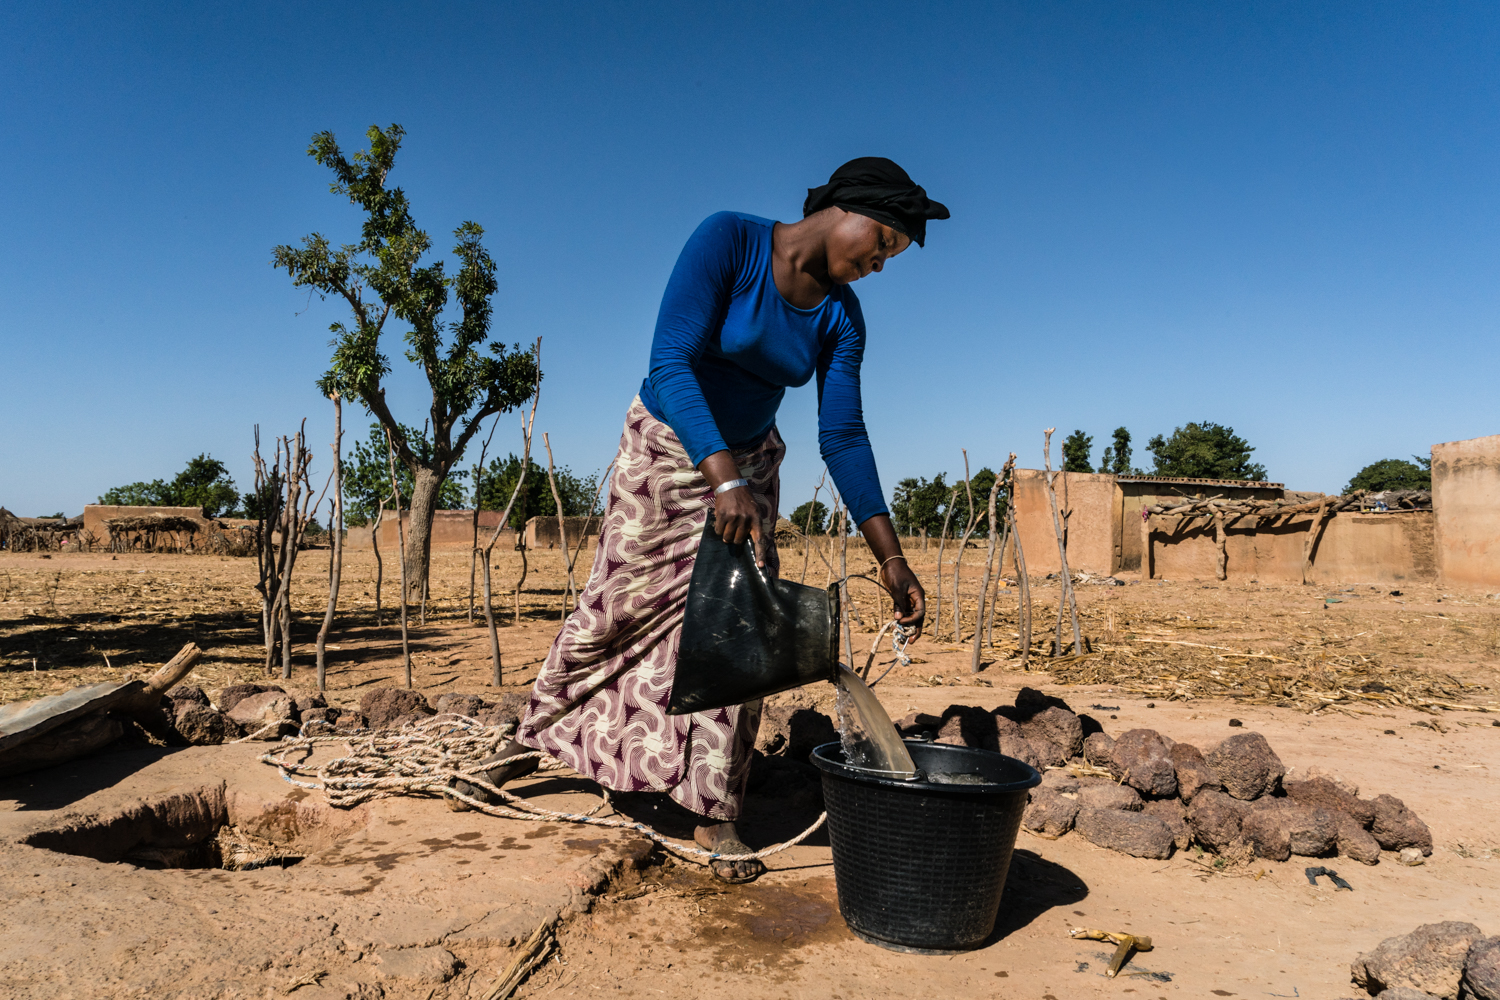 A woman fetches water from a well in Kolokani, a village in Mali.